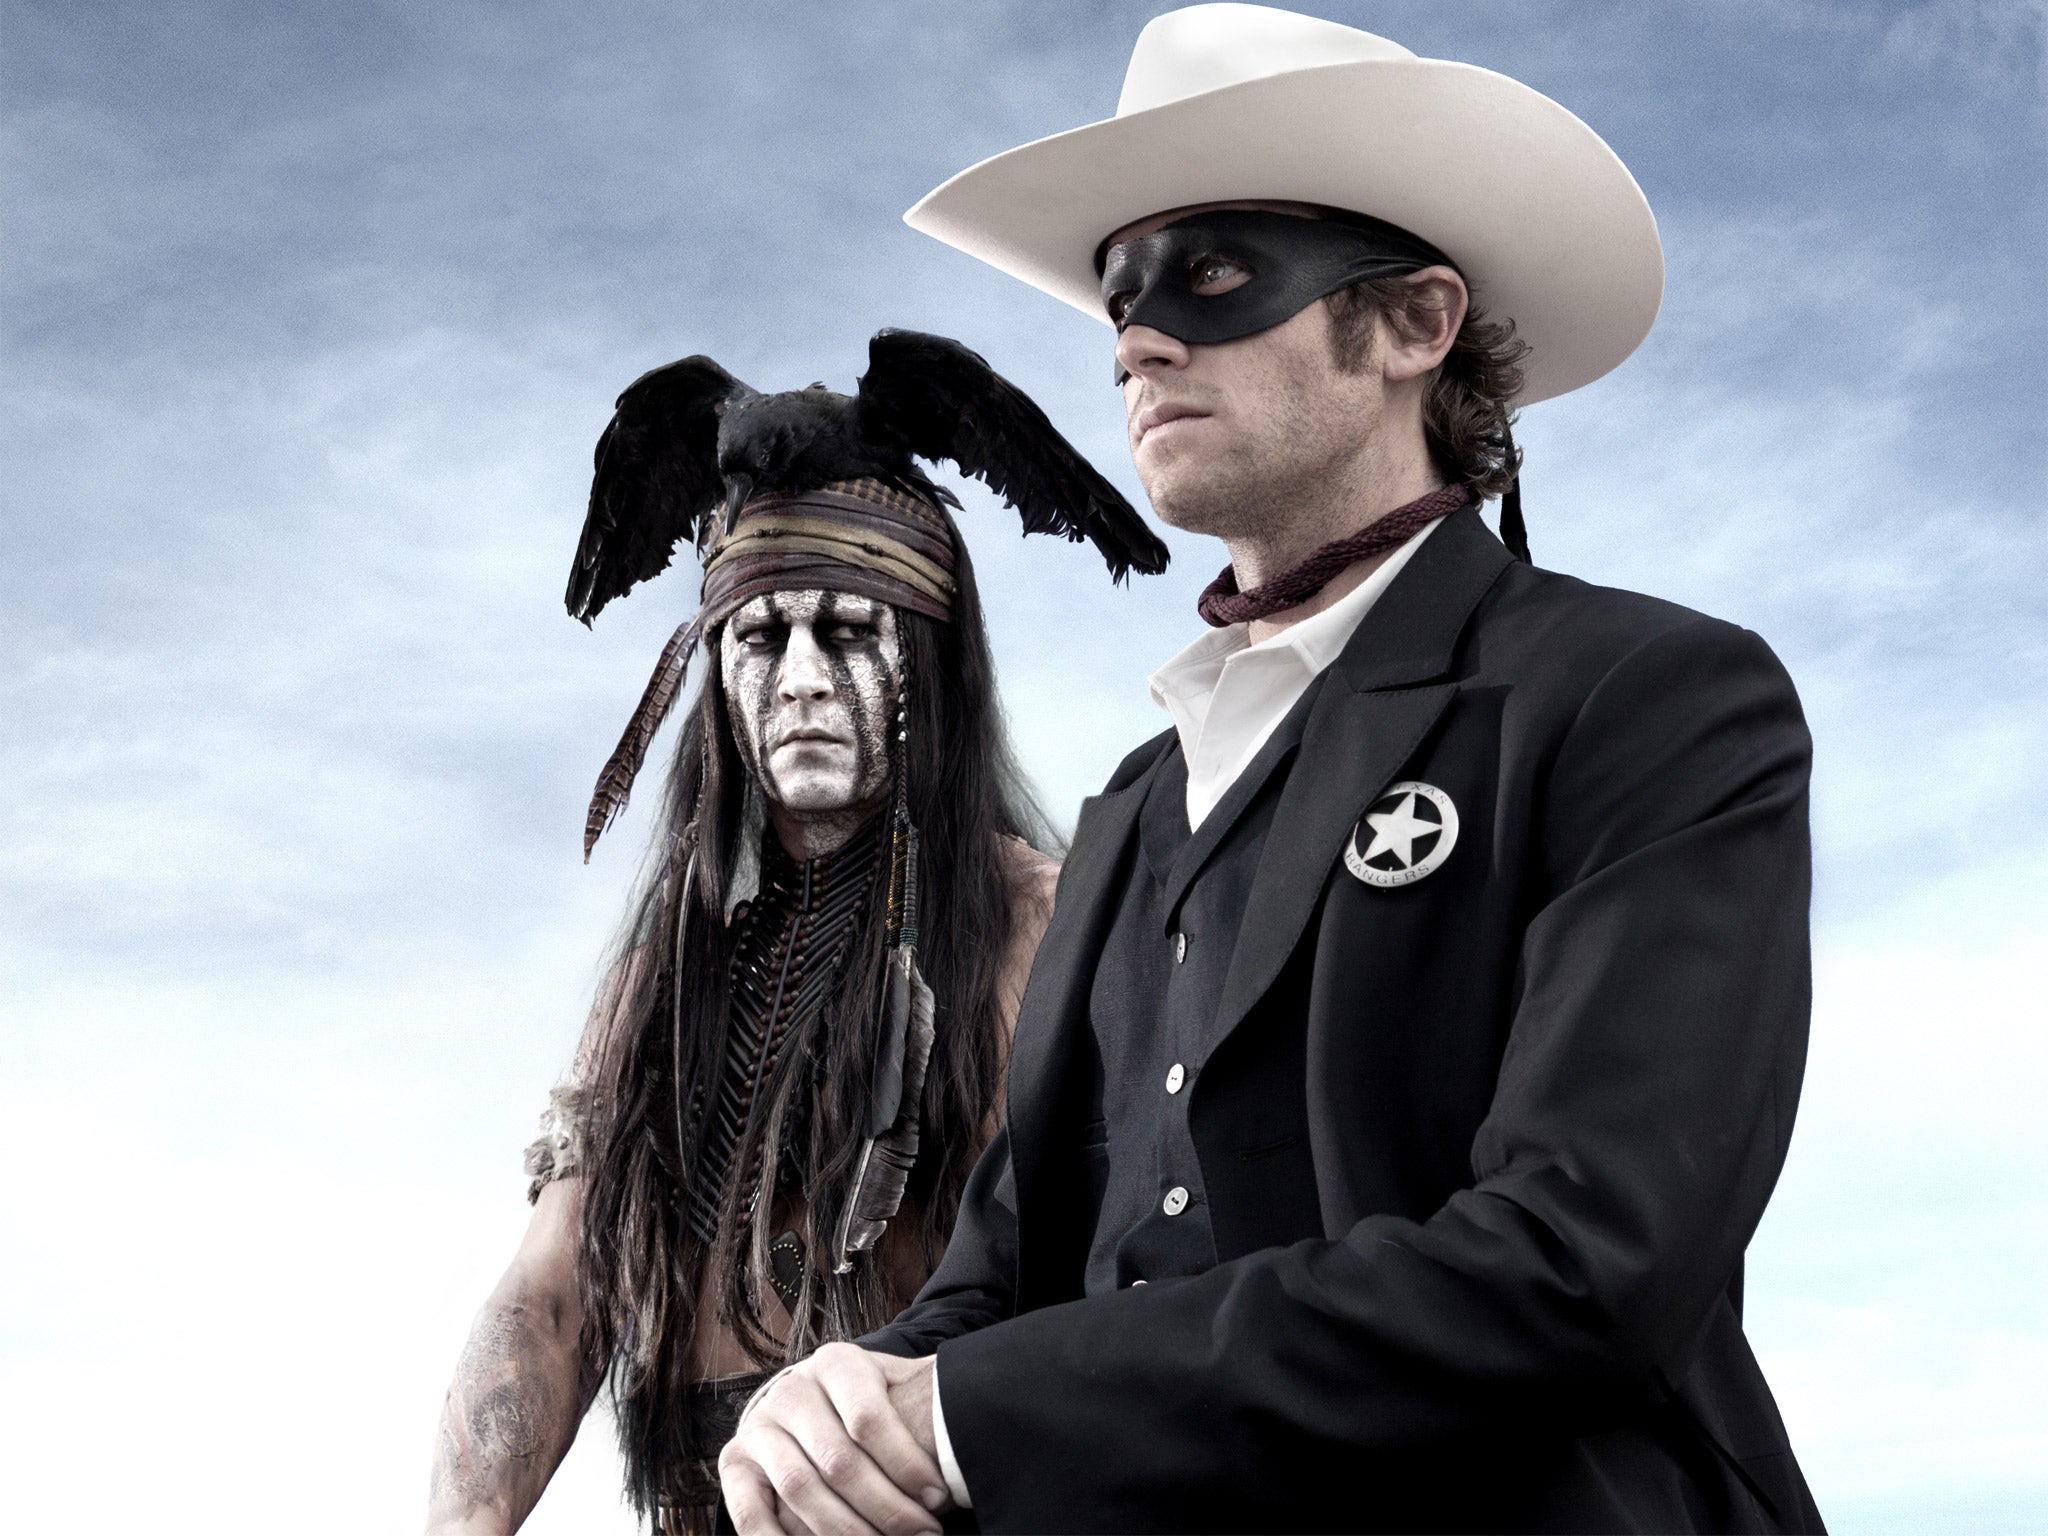 The masked Lone Ranger (Arnie Hammer) and Tonto (Johnny Depp) star in the latest and rather wearying reincarnation